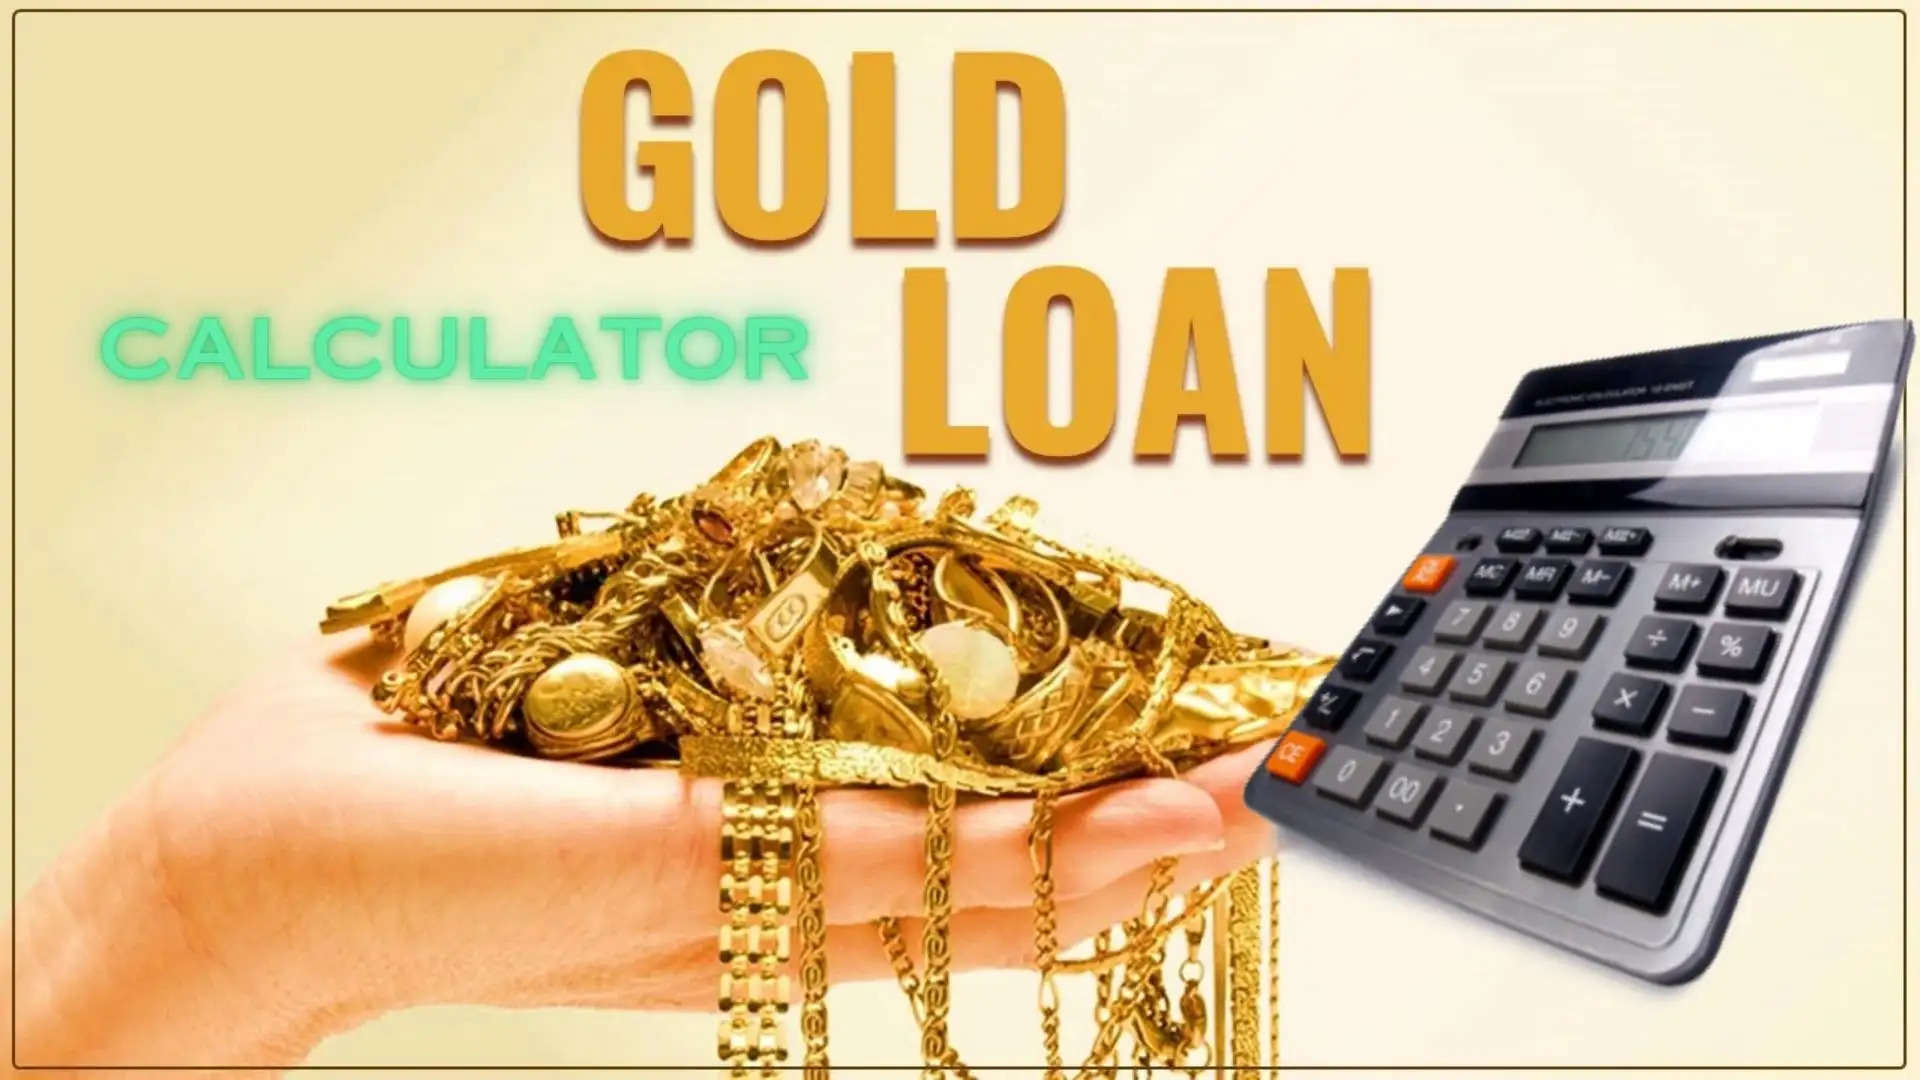 What is a Gold Loan, Calculating Gold Loan Interest, calculating Interest on Gold Loan